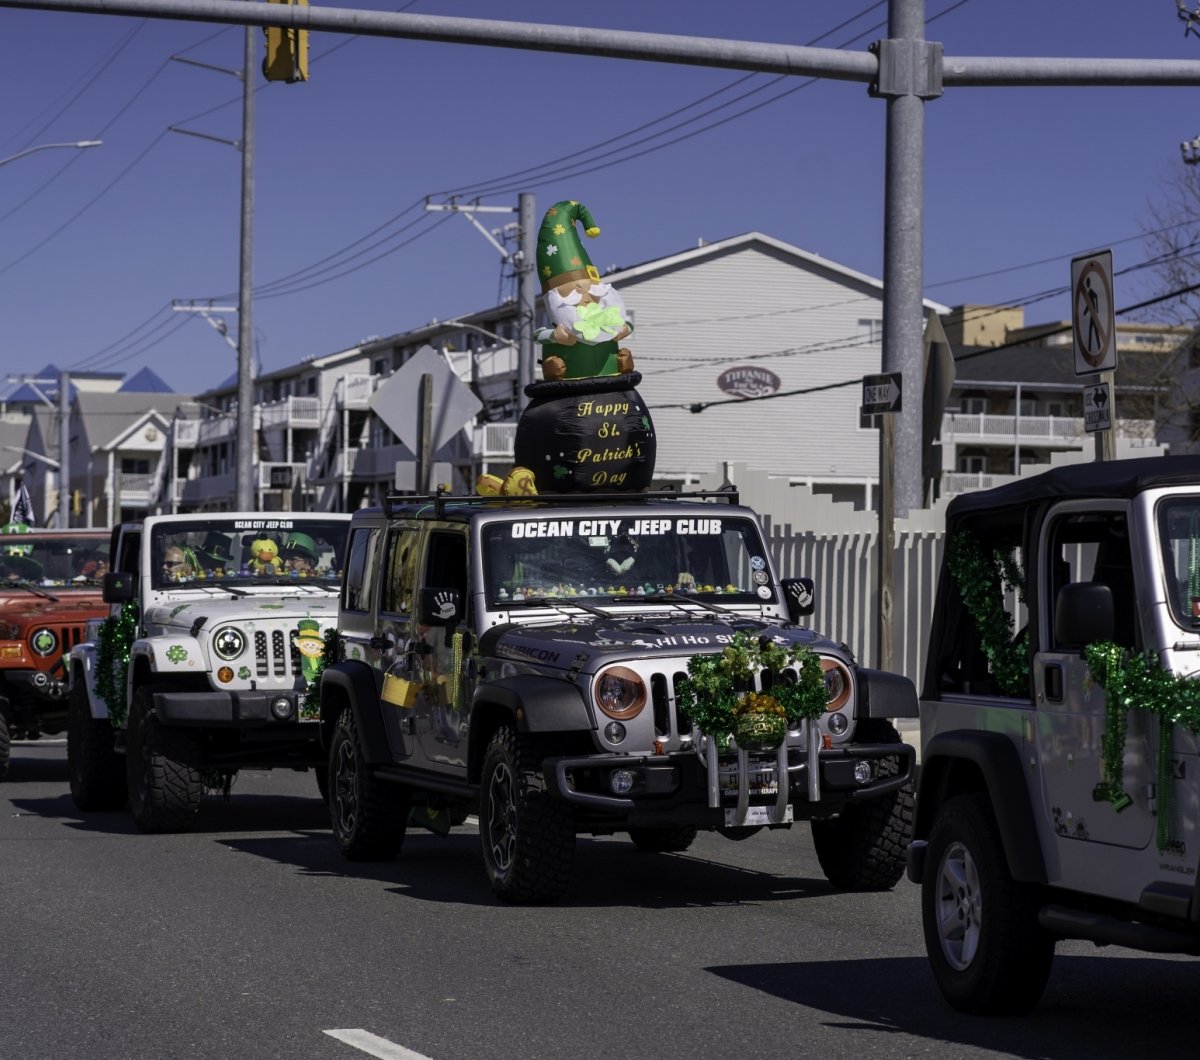 OCMD Jeep Club at the St. Patrick's Day parade